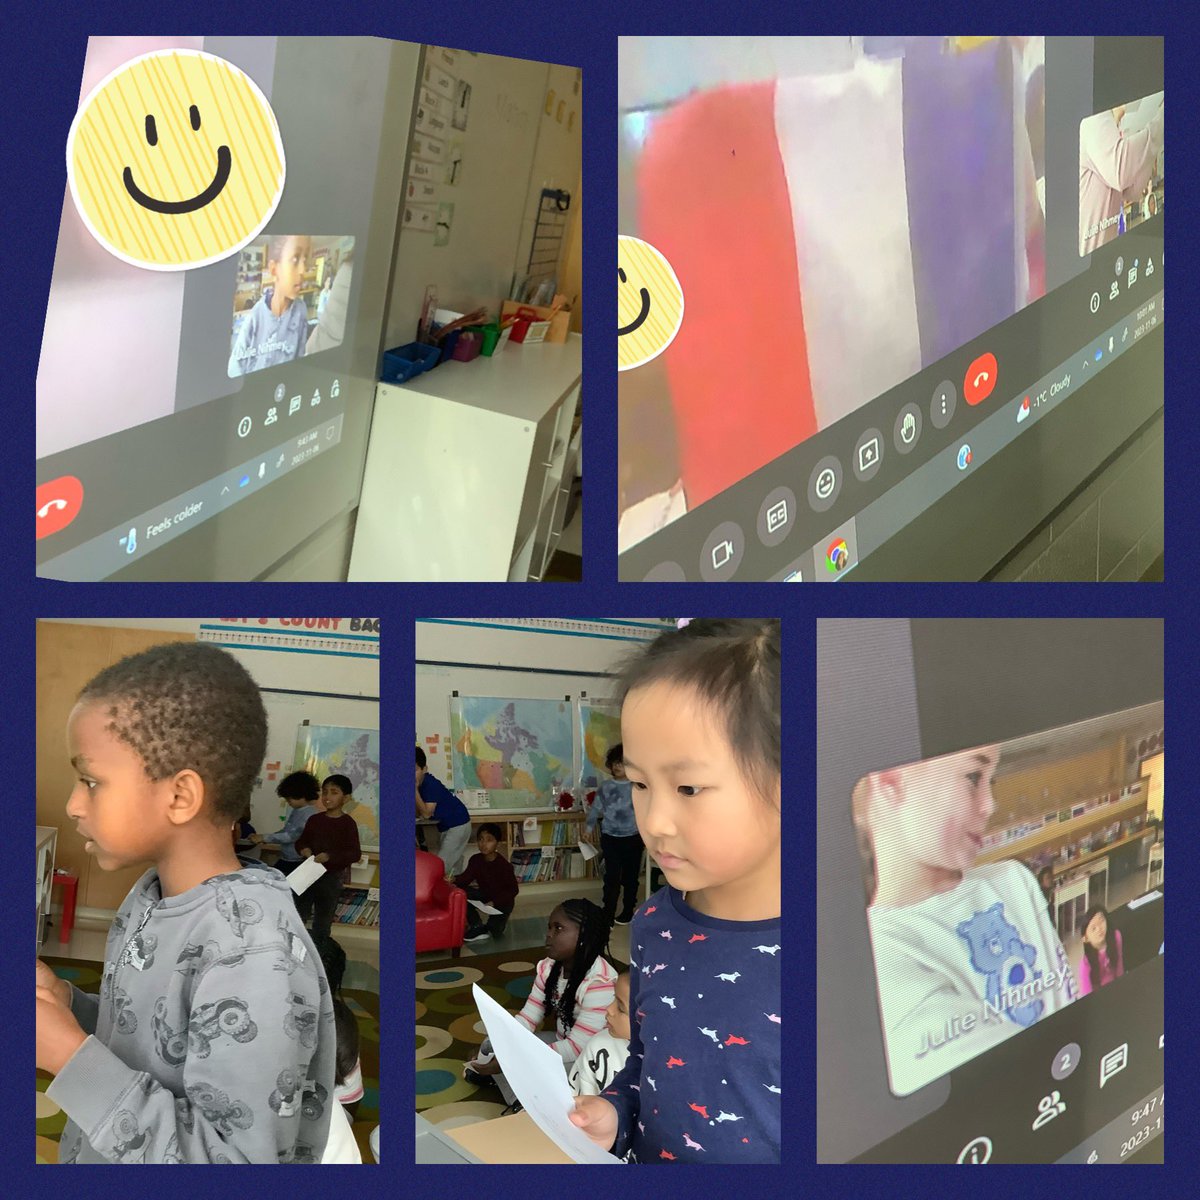 Today we did a #mysteryskype with @arperrier’s class in Montauroux France! We had to ask yes or no questions to try to find out where they were from and they had to do the same! They guessed Canada and then Ottawa. We guessed France! @StAnneOCSB